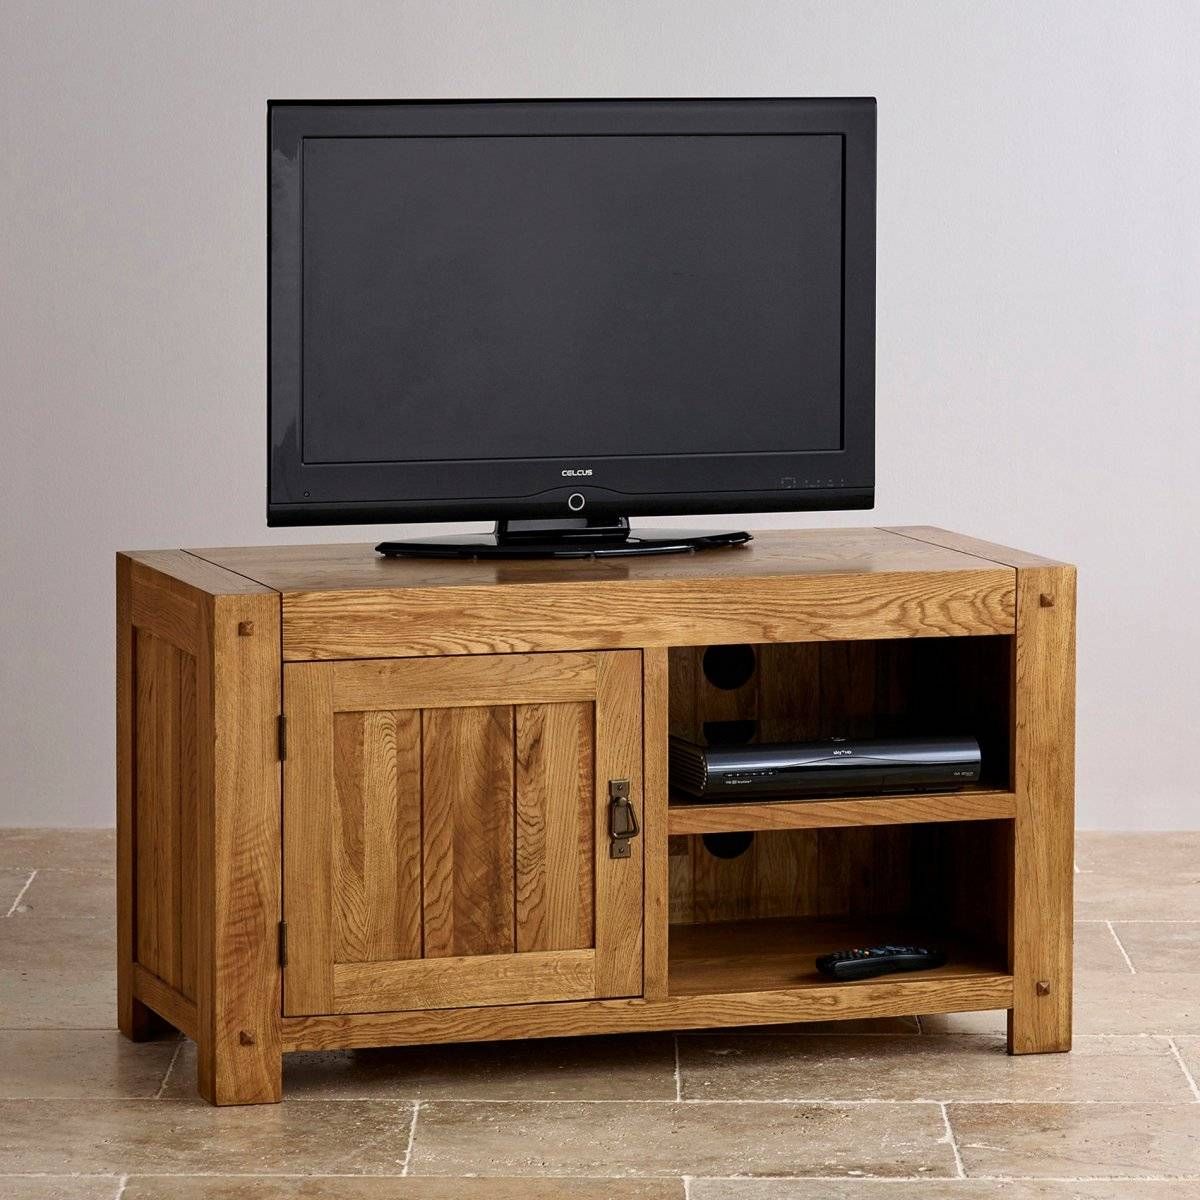 Quercus Tv Cabinet In Rustic Solid Oak | Oak Furniture Land Within Rustic Oak Tv Stands (View 5 of 15)